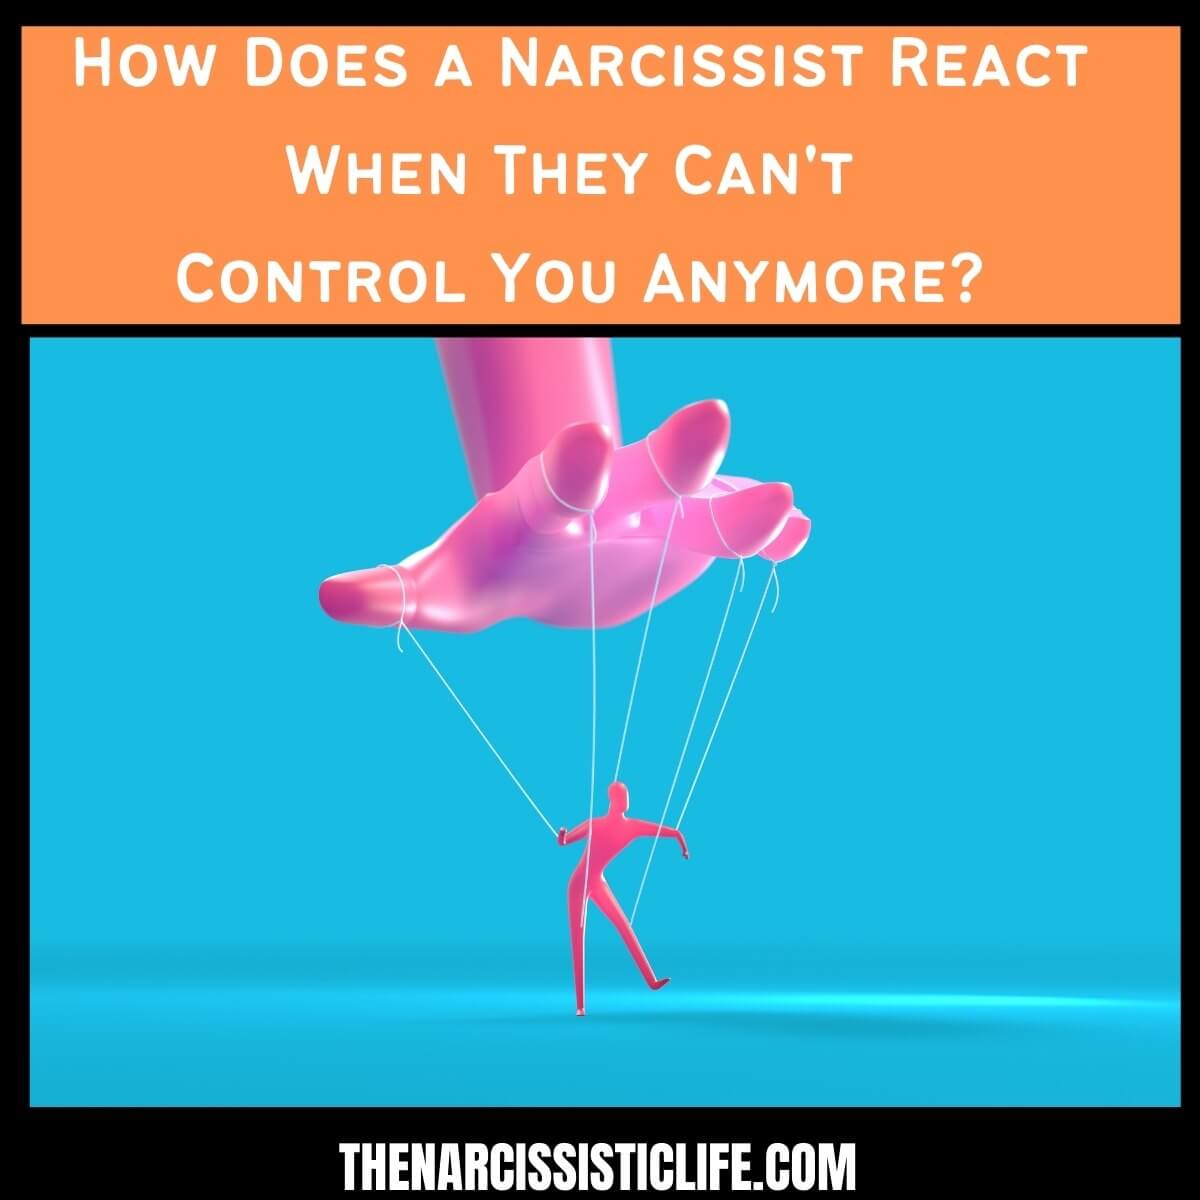 A narcissist finds someone new